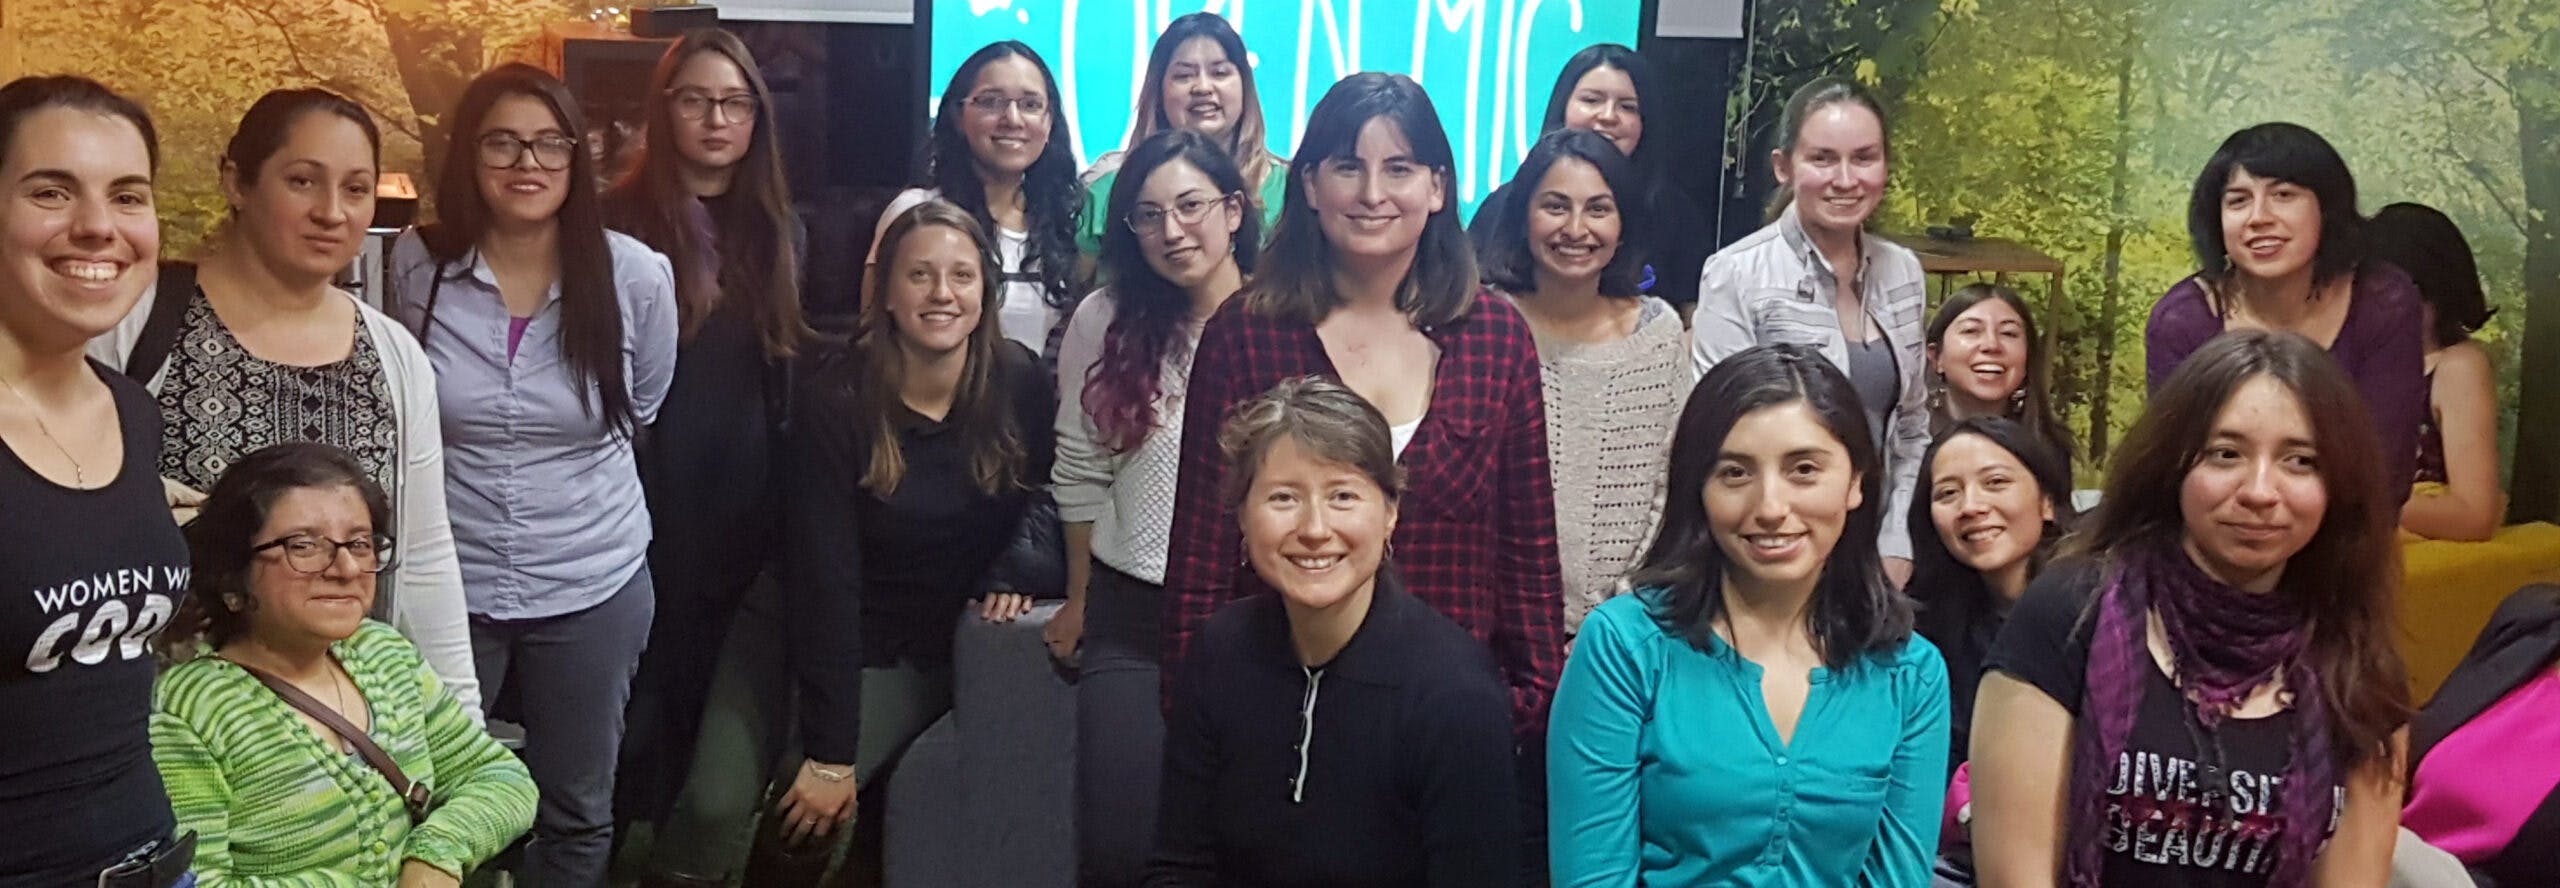 Women Who Code Launches Network in Buenos Aires